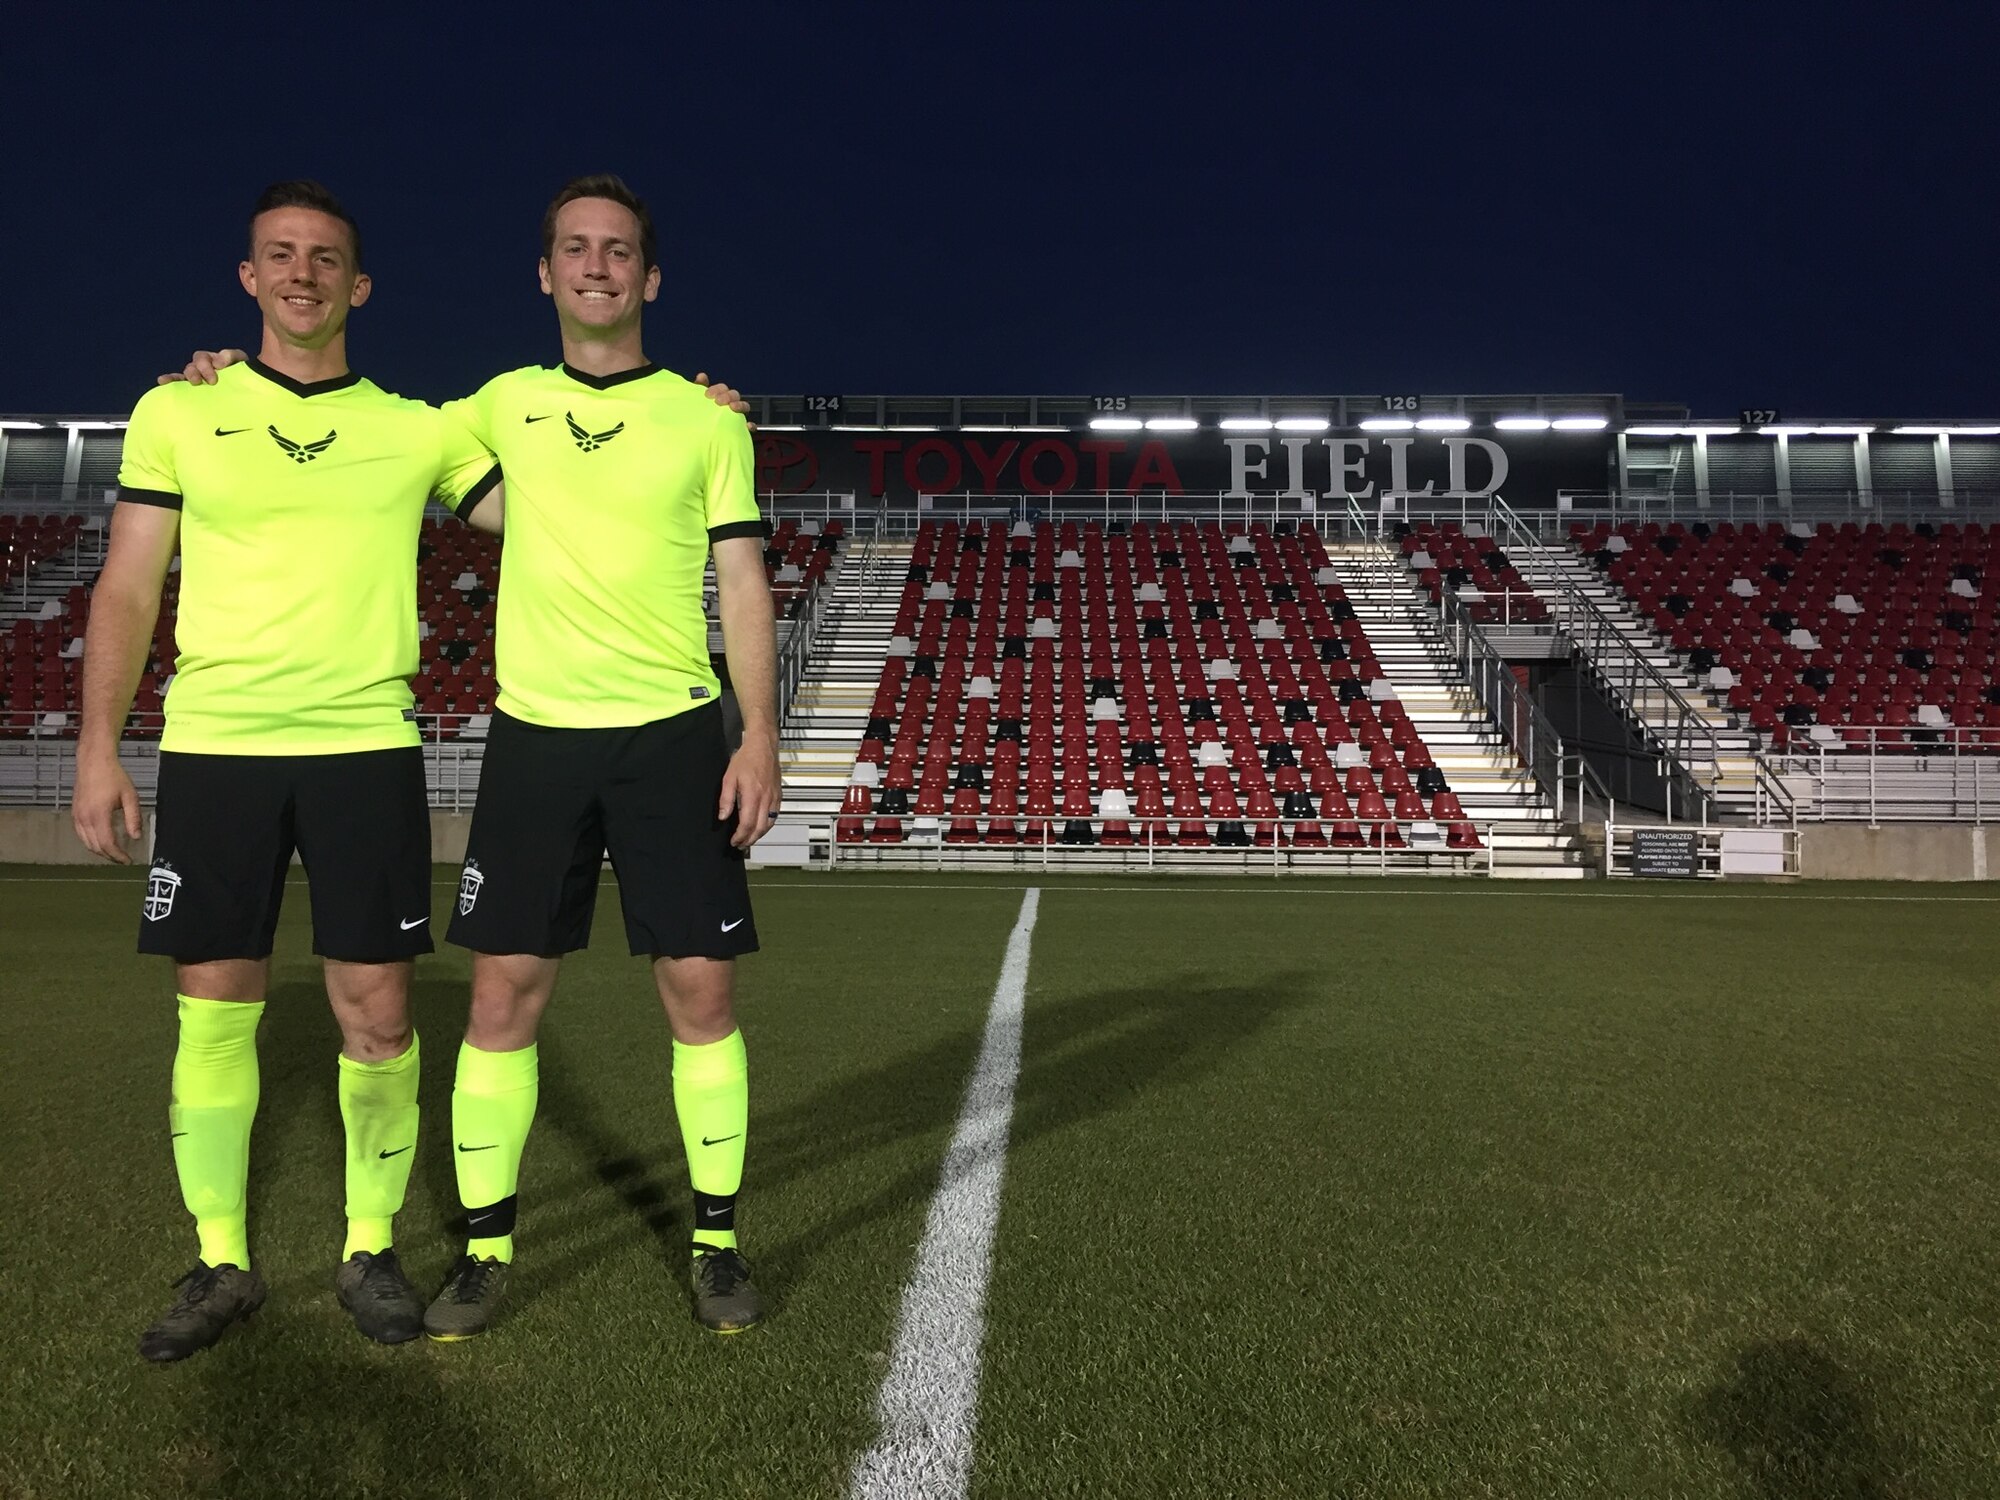 U.S. Air Force 1st Lt. Micah Cummins, right, 100th Air Refueling Wing chief of protocol, poses for a photograph with U.S. Air Force Airman 1st Class Tim Bettes, left, 48th Force Support Squadron Career Development apprentice, after a game against the United Soccer League’s San Antonio Football Club at Toyota Field in San Antonio, Texas, May 4, 2016. Through his love of the sport, Cummins is able to meet many people from across the Air Force. (Courtesy photo)